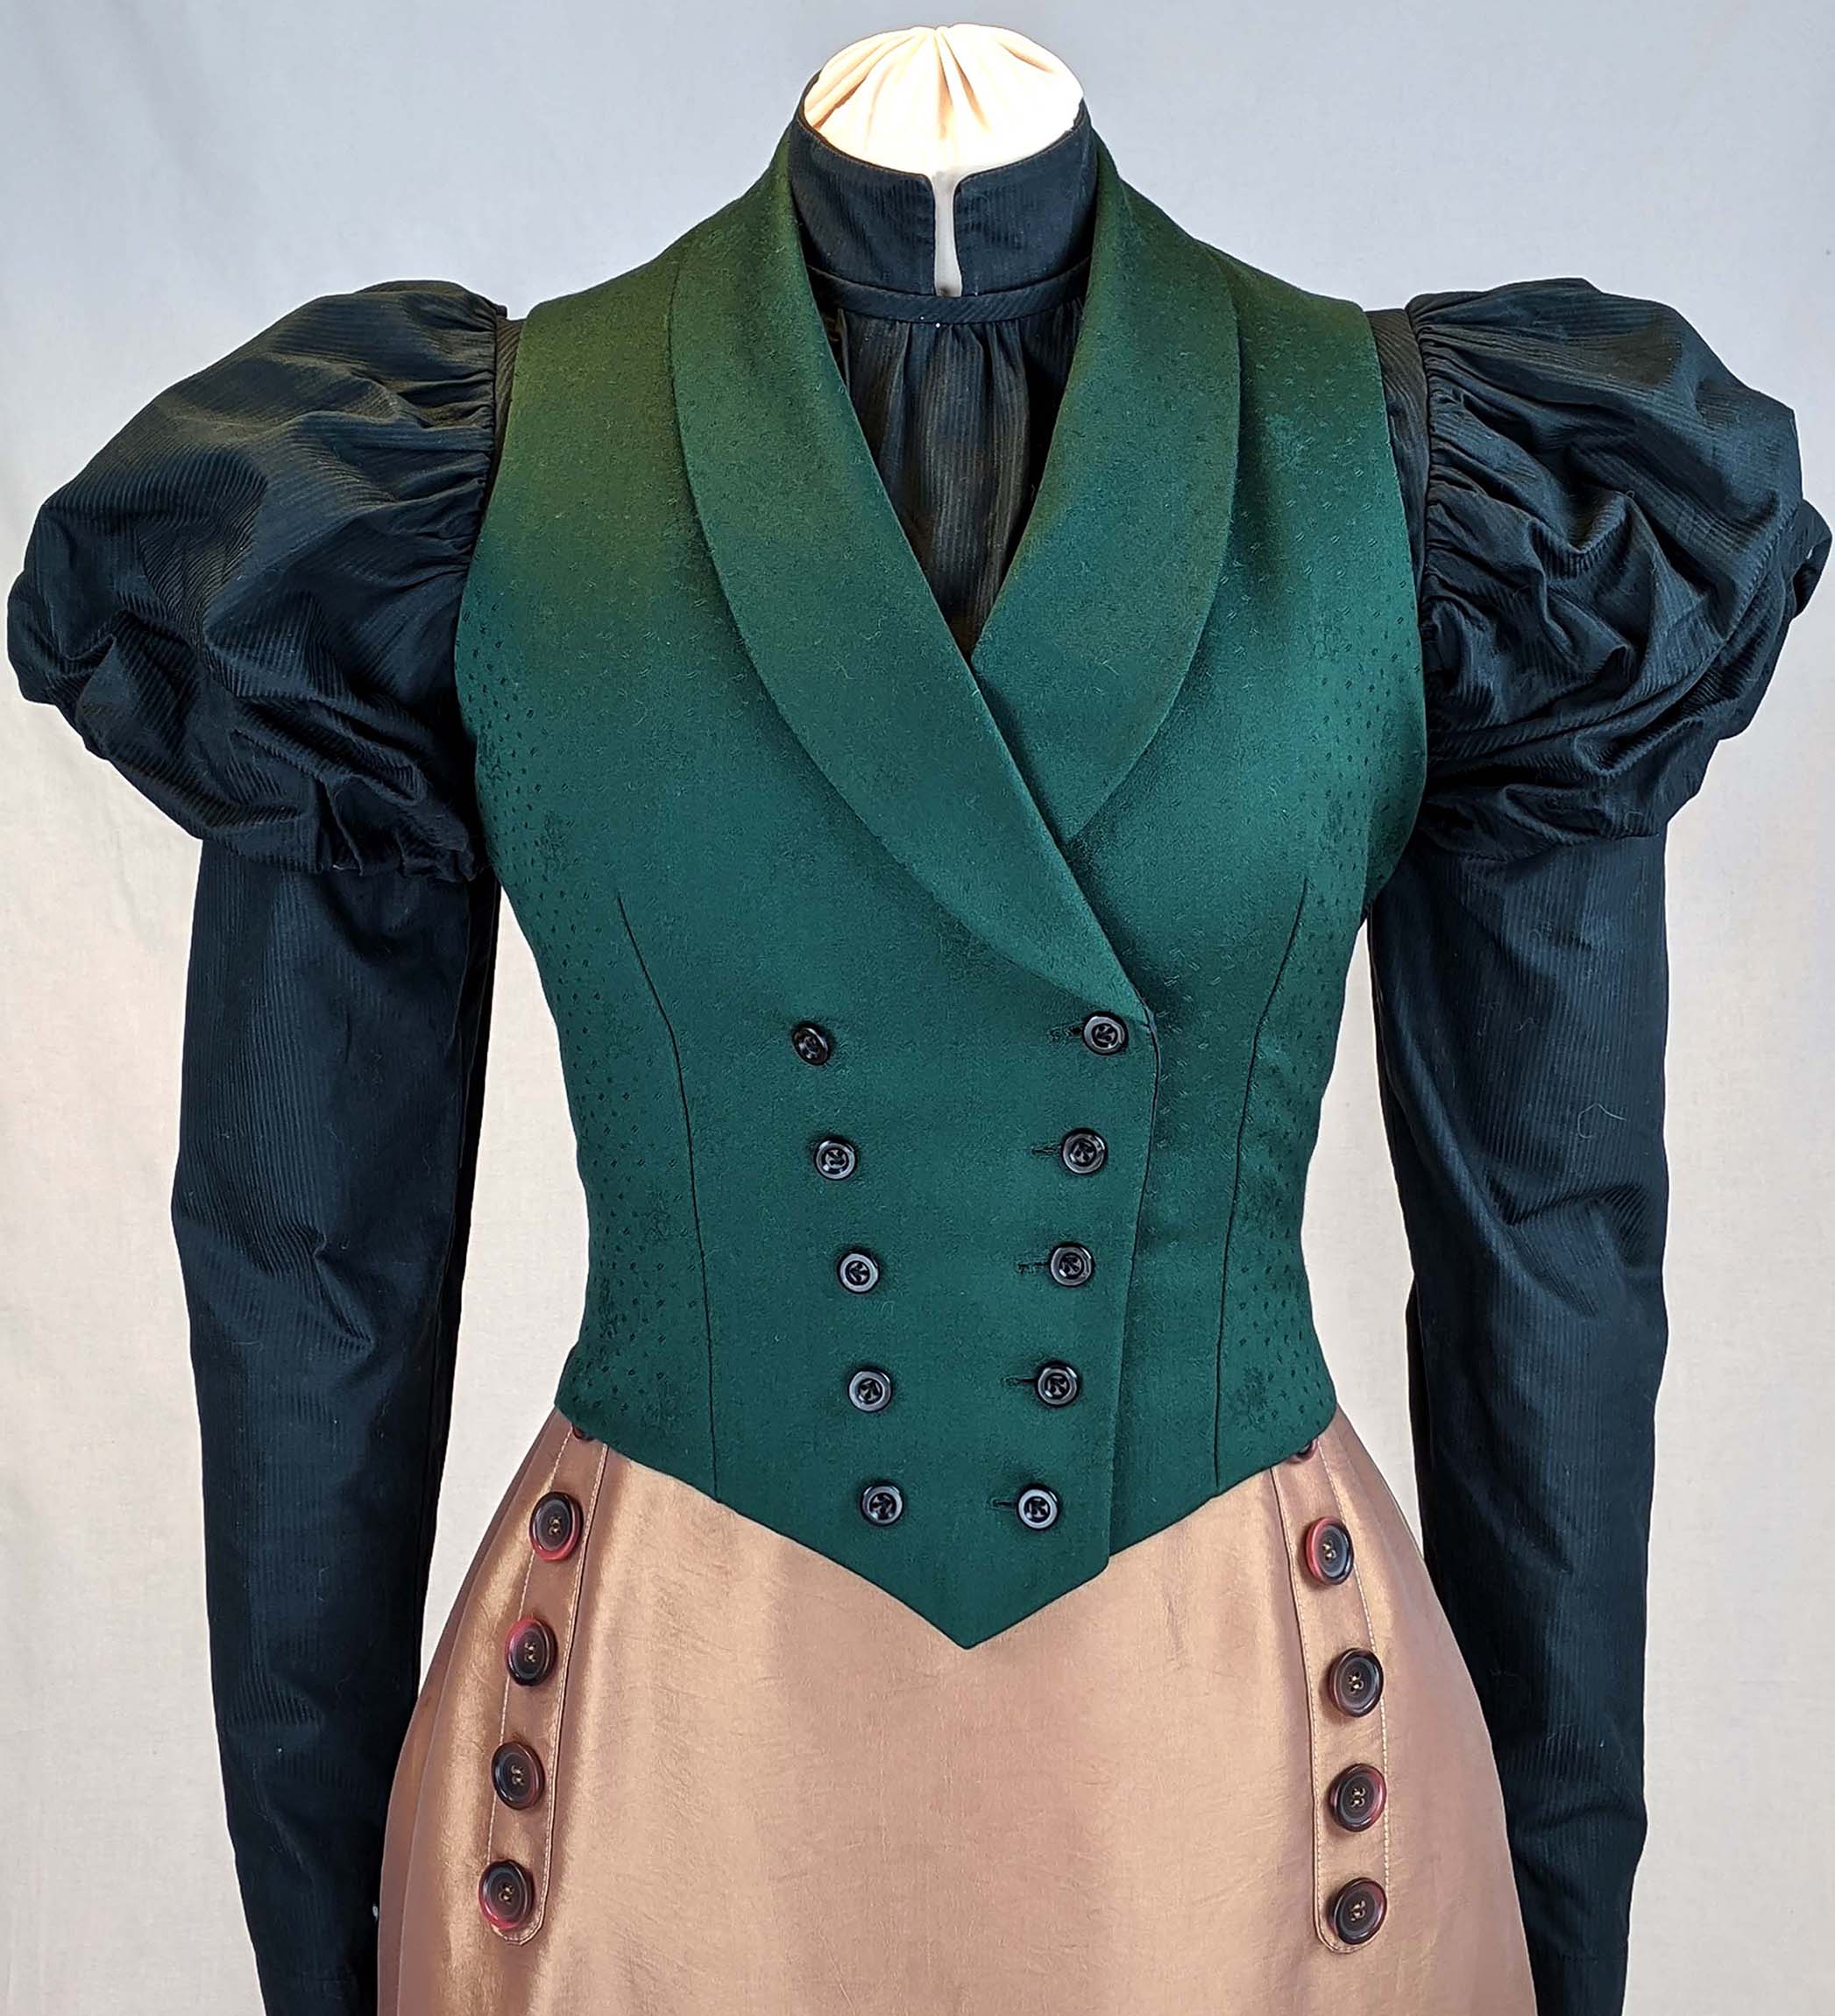 Ladies Vest circa 1890 with two front options Sewing Pattern #0220 Size US 8-30 (EU 34-56)